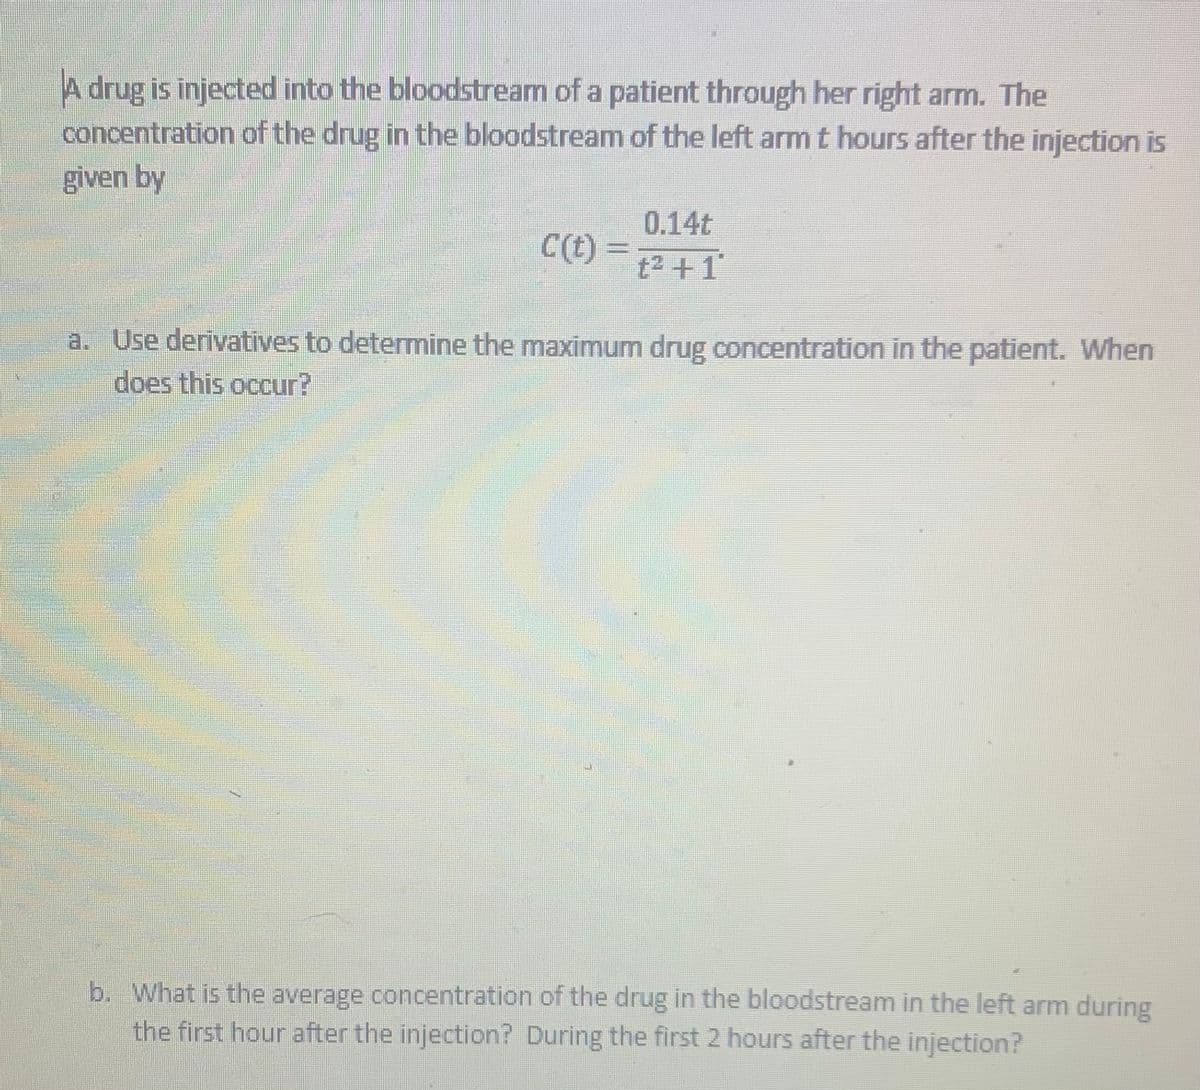 A drug is injected into the bloodstream of a patient through her right arm. The
concentration of the drug in the bloodstream of the left armt hours after the injection is
given by
0.14t
C(t)
t2 +1
a. Use derivatives to determine the maximum drug concentration in the patient. When
does this occur?
b. What is the average concentration of the drug in the bloodstream in the left arm during
the first hour after the injection? During the first 2 hours after the injection?
